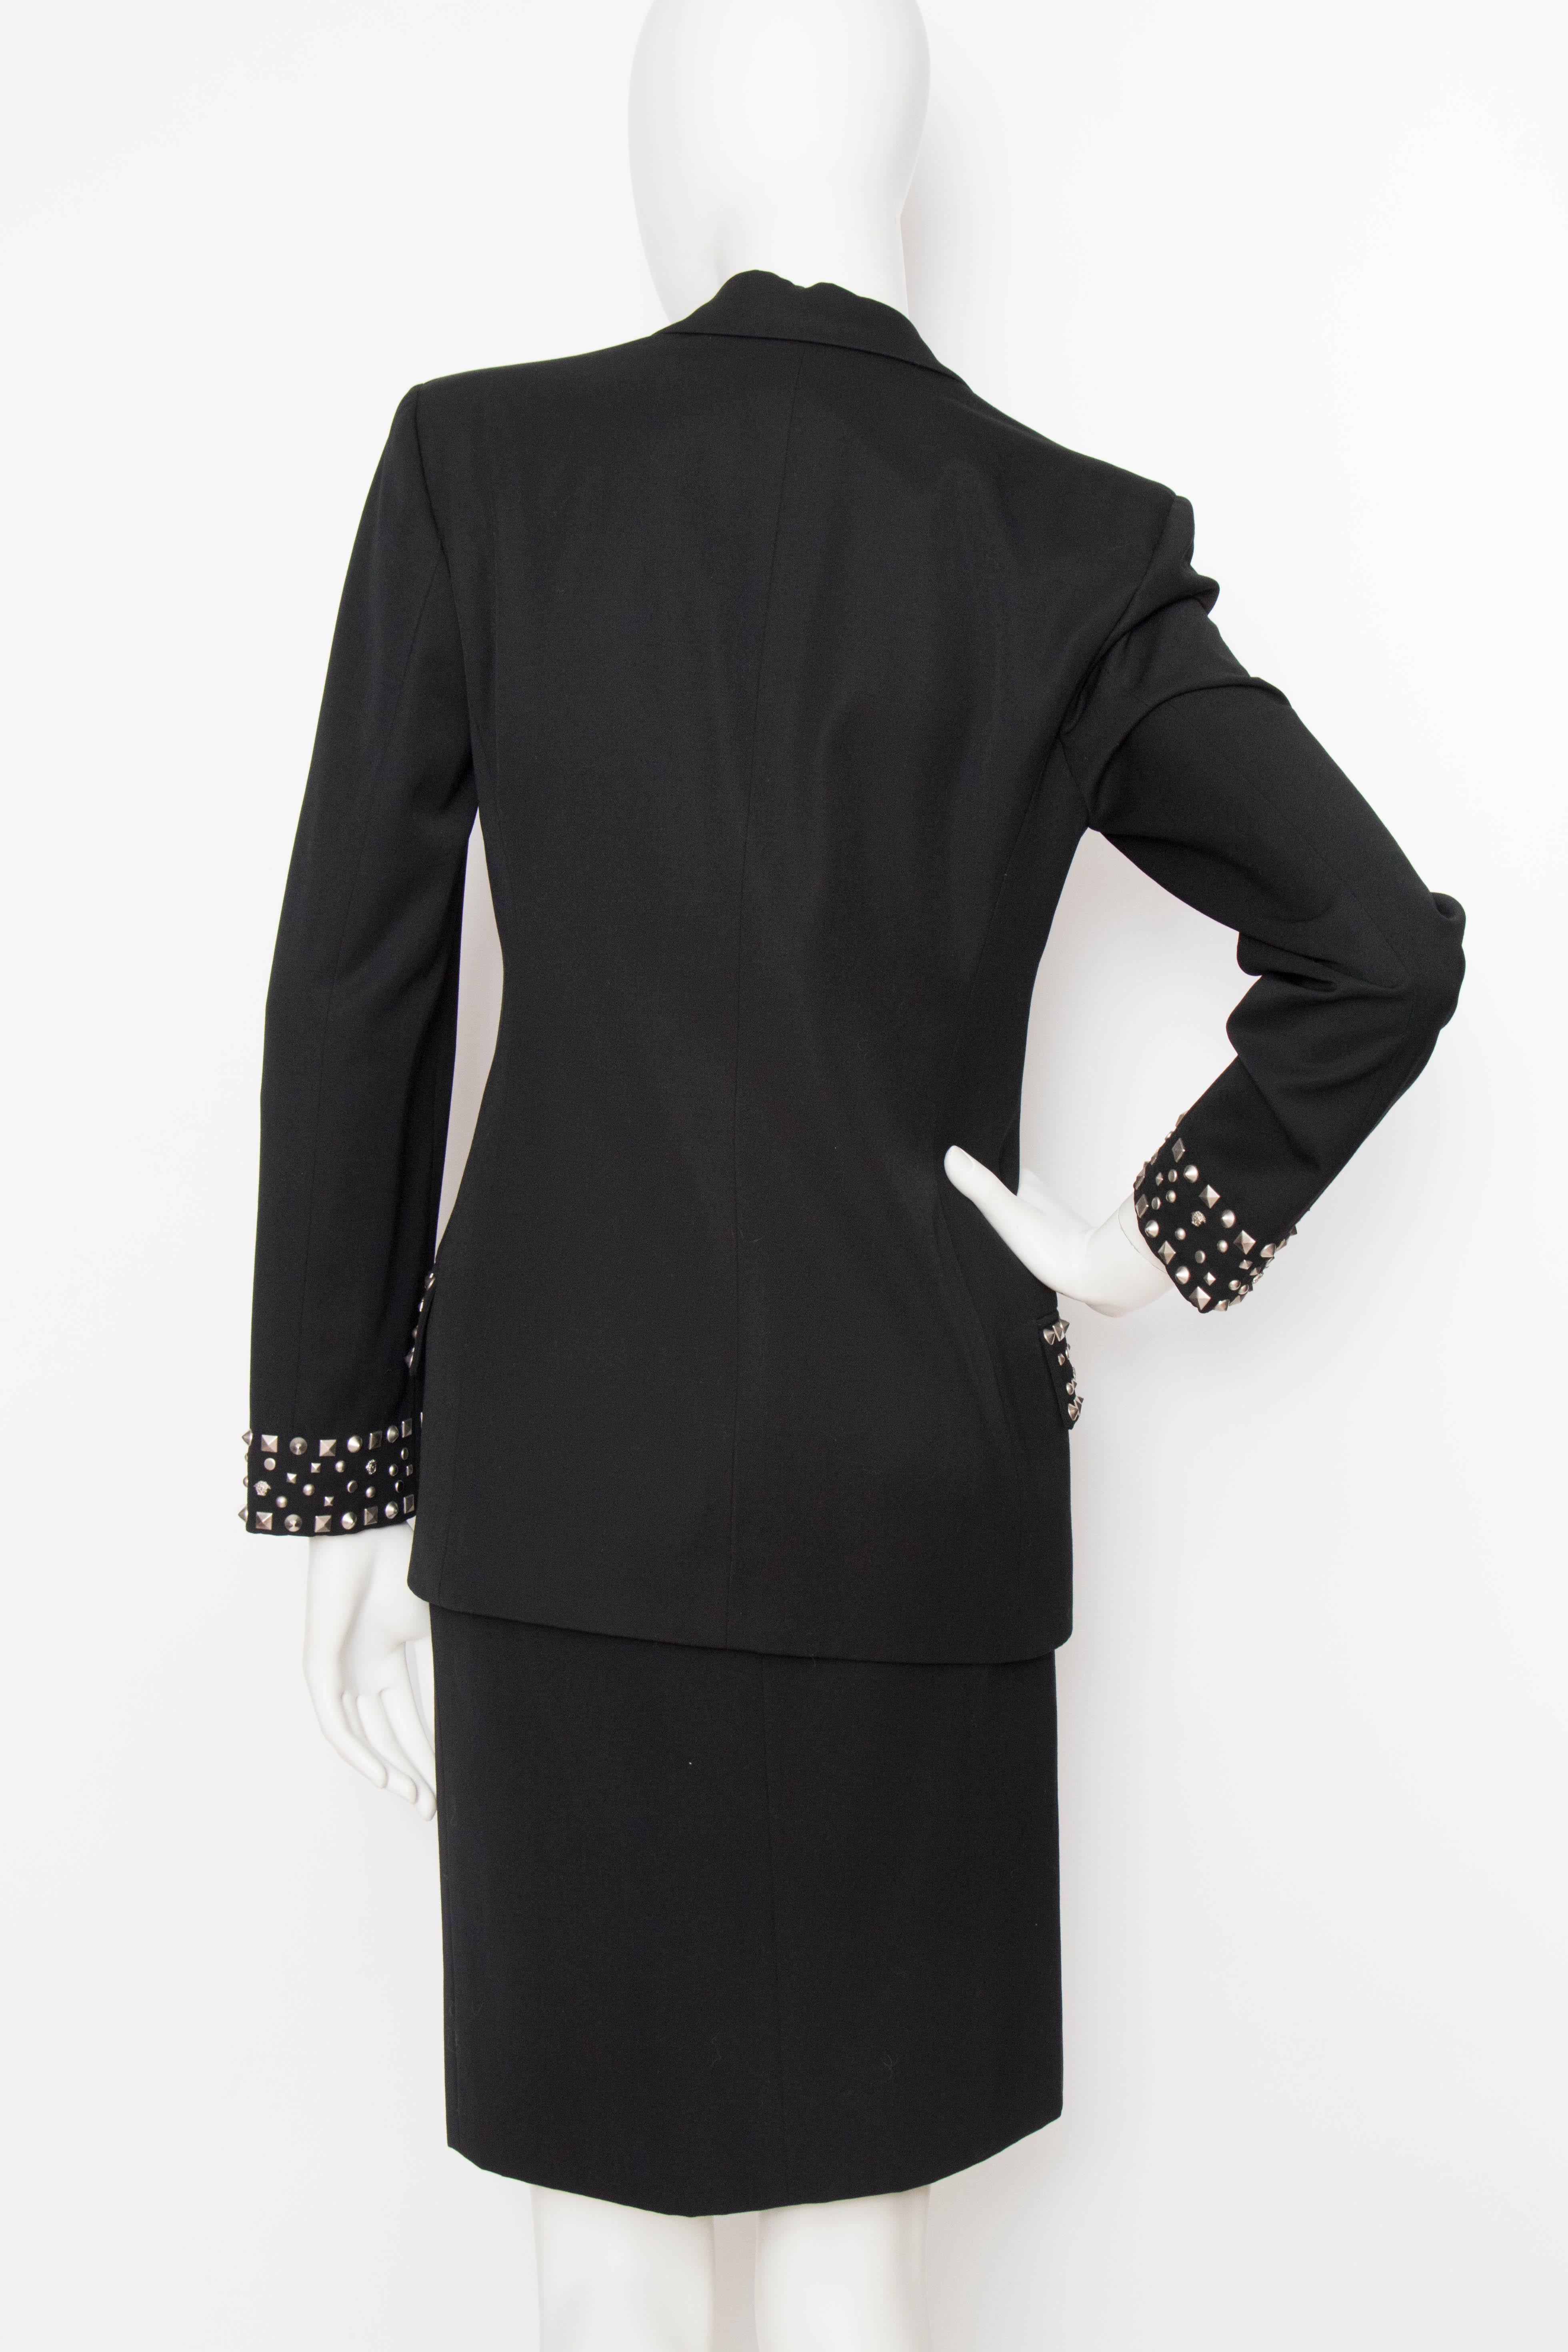 Women's or Men's A Vintage Black Gianni Versace Couture Studded Wool Skirt Suit 